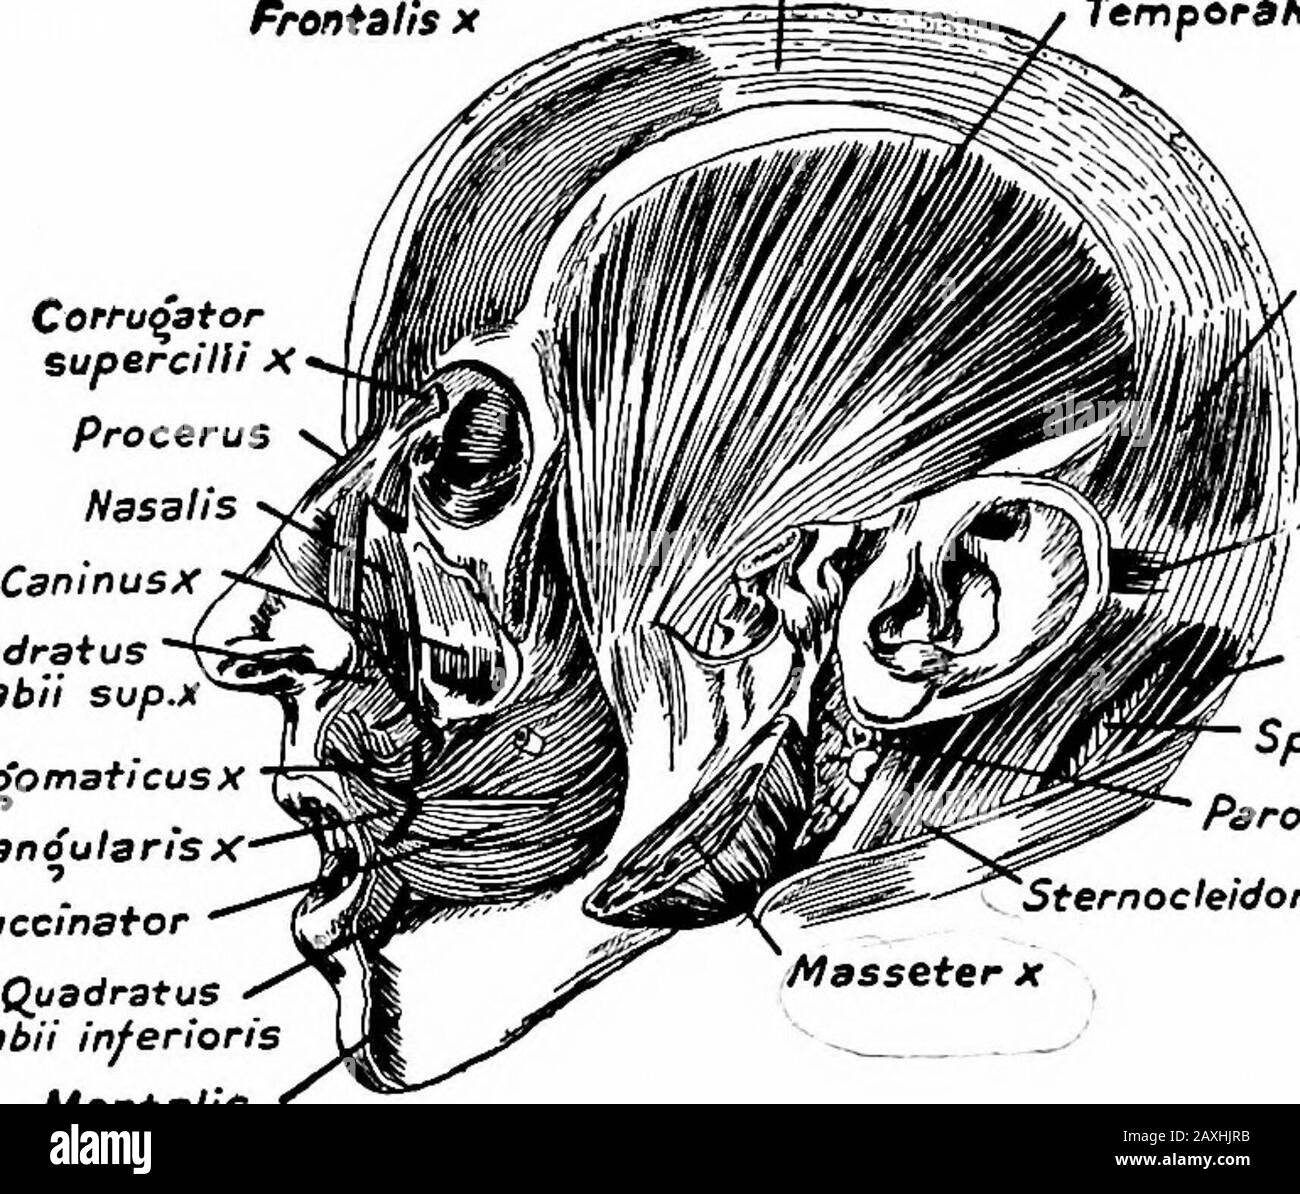 A manual of anatomy . on of the trigeminal nerve. The m. pterygoideus externus arises from the infratemporal sur-face of the greater wing of the sphenoid bone (superficial head), andfrom the lateral surface of the lateral plate of the pterygoid processof the same bone (deep head). It is inserted into the anterior part ofthe neck of the mandible just below the condyle and into the capsuleof the joint and the articular disc. Action.—Protrusion and lateral movefnents of the mandible. Nerve Supply.—Mandibular division of the trigeminal nerve. The m. pterygoideus internus arises from the medial sur Stock Photo